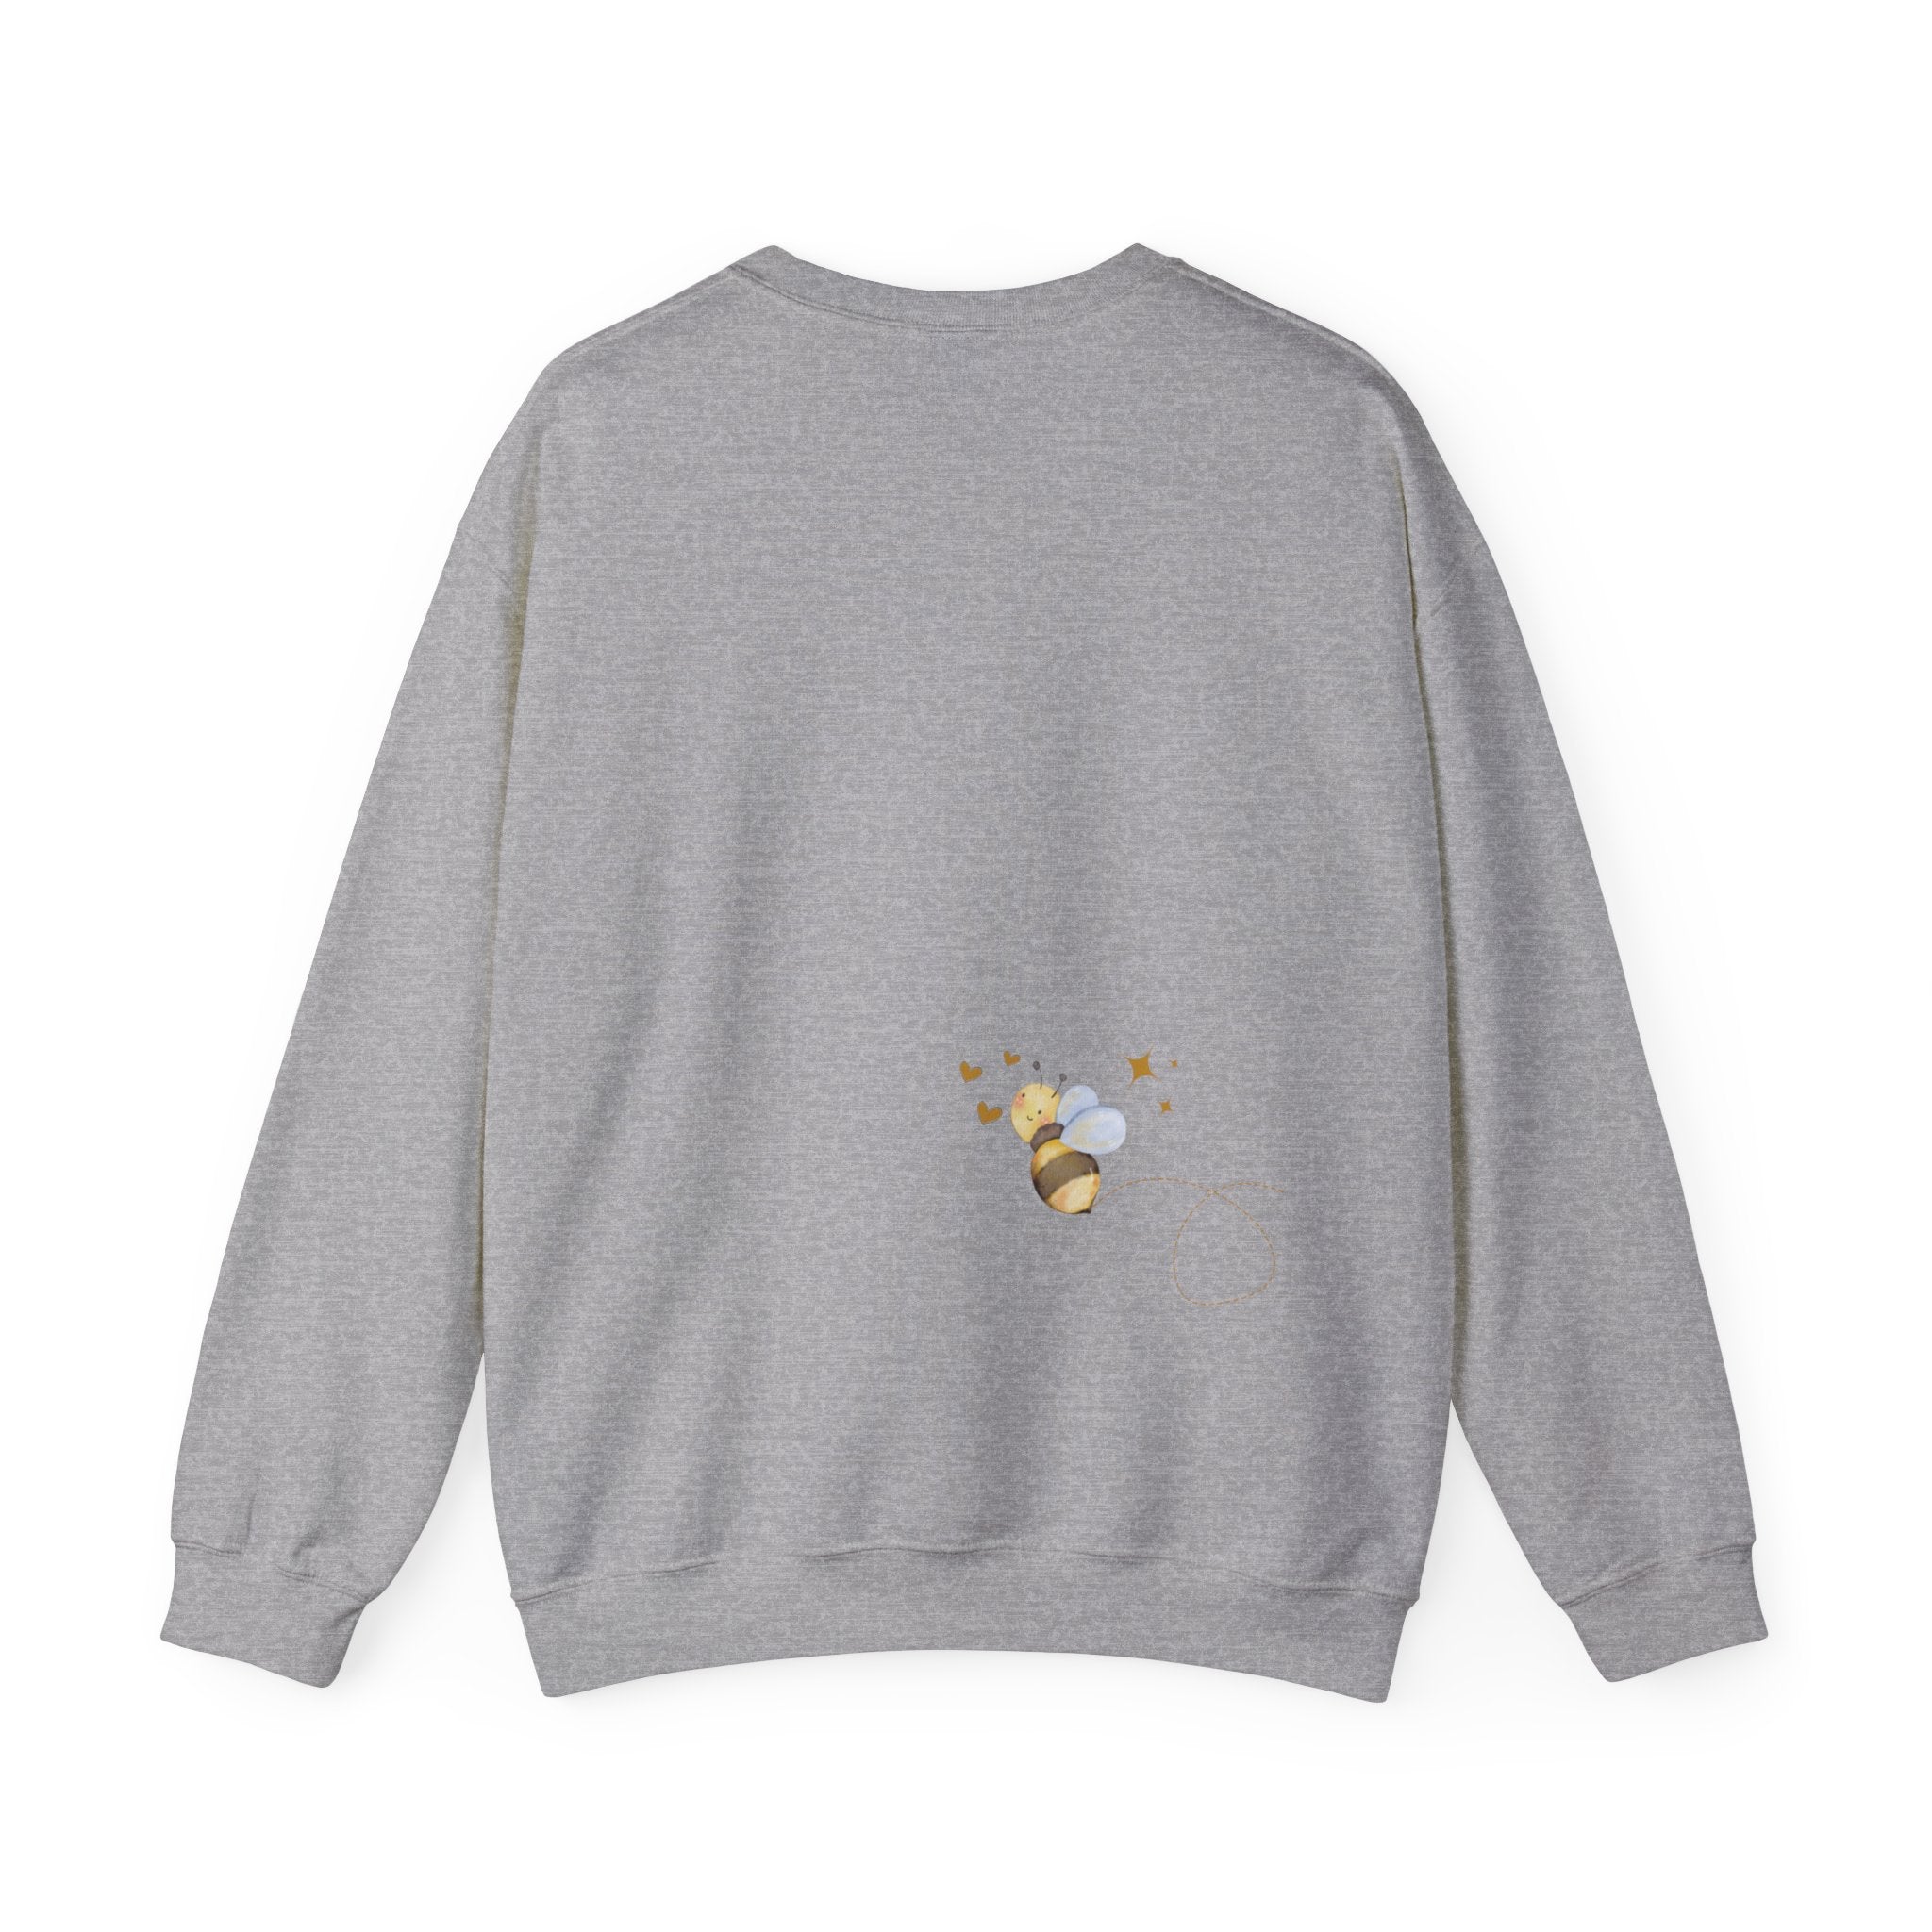 Bee Kind Bumblebee inspired ladies Sweatshirt with bee detail on front and back